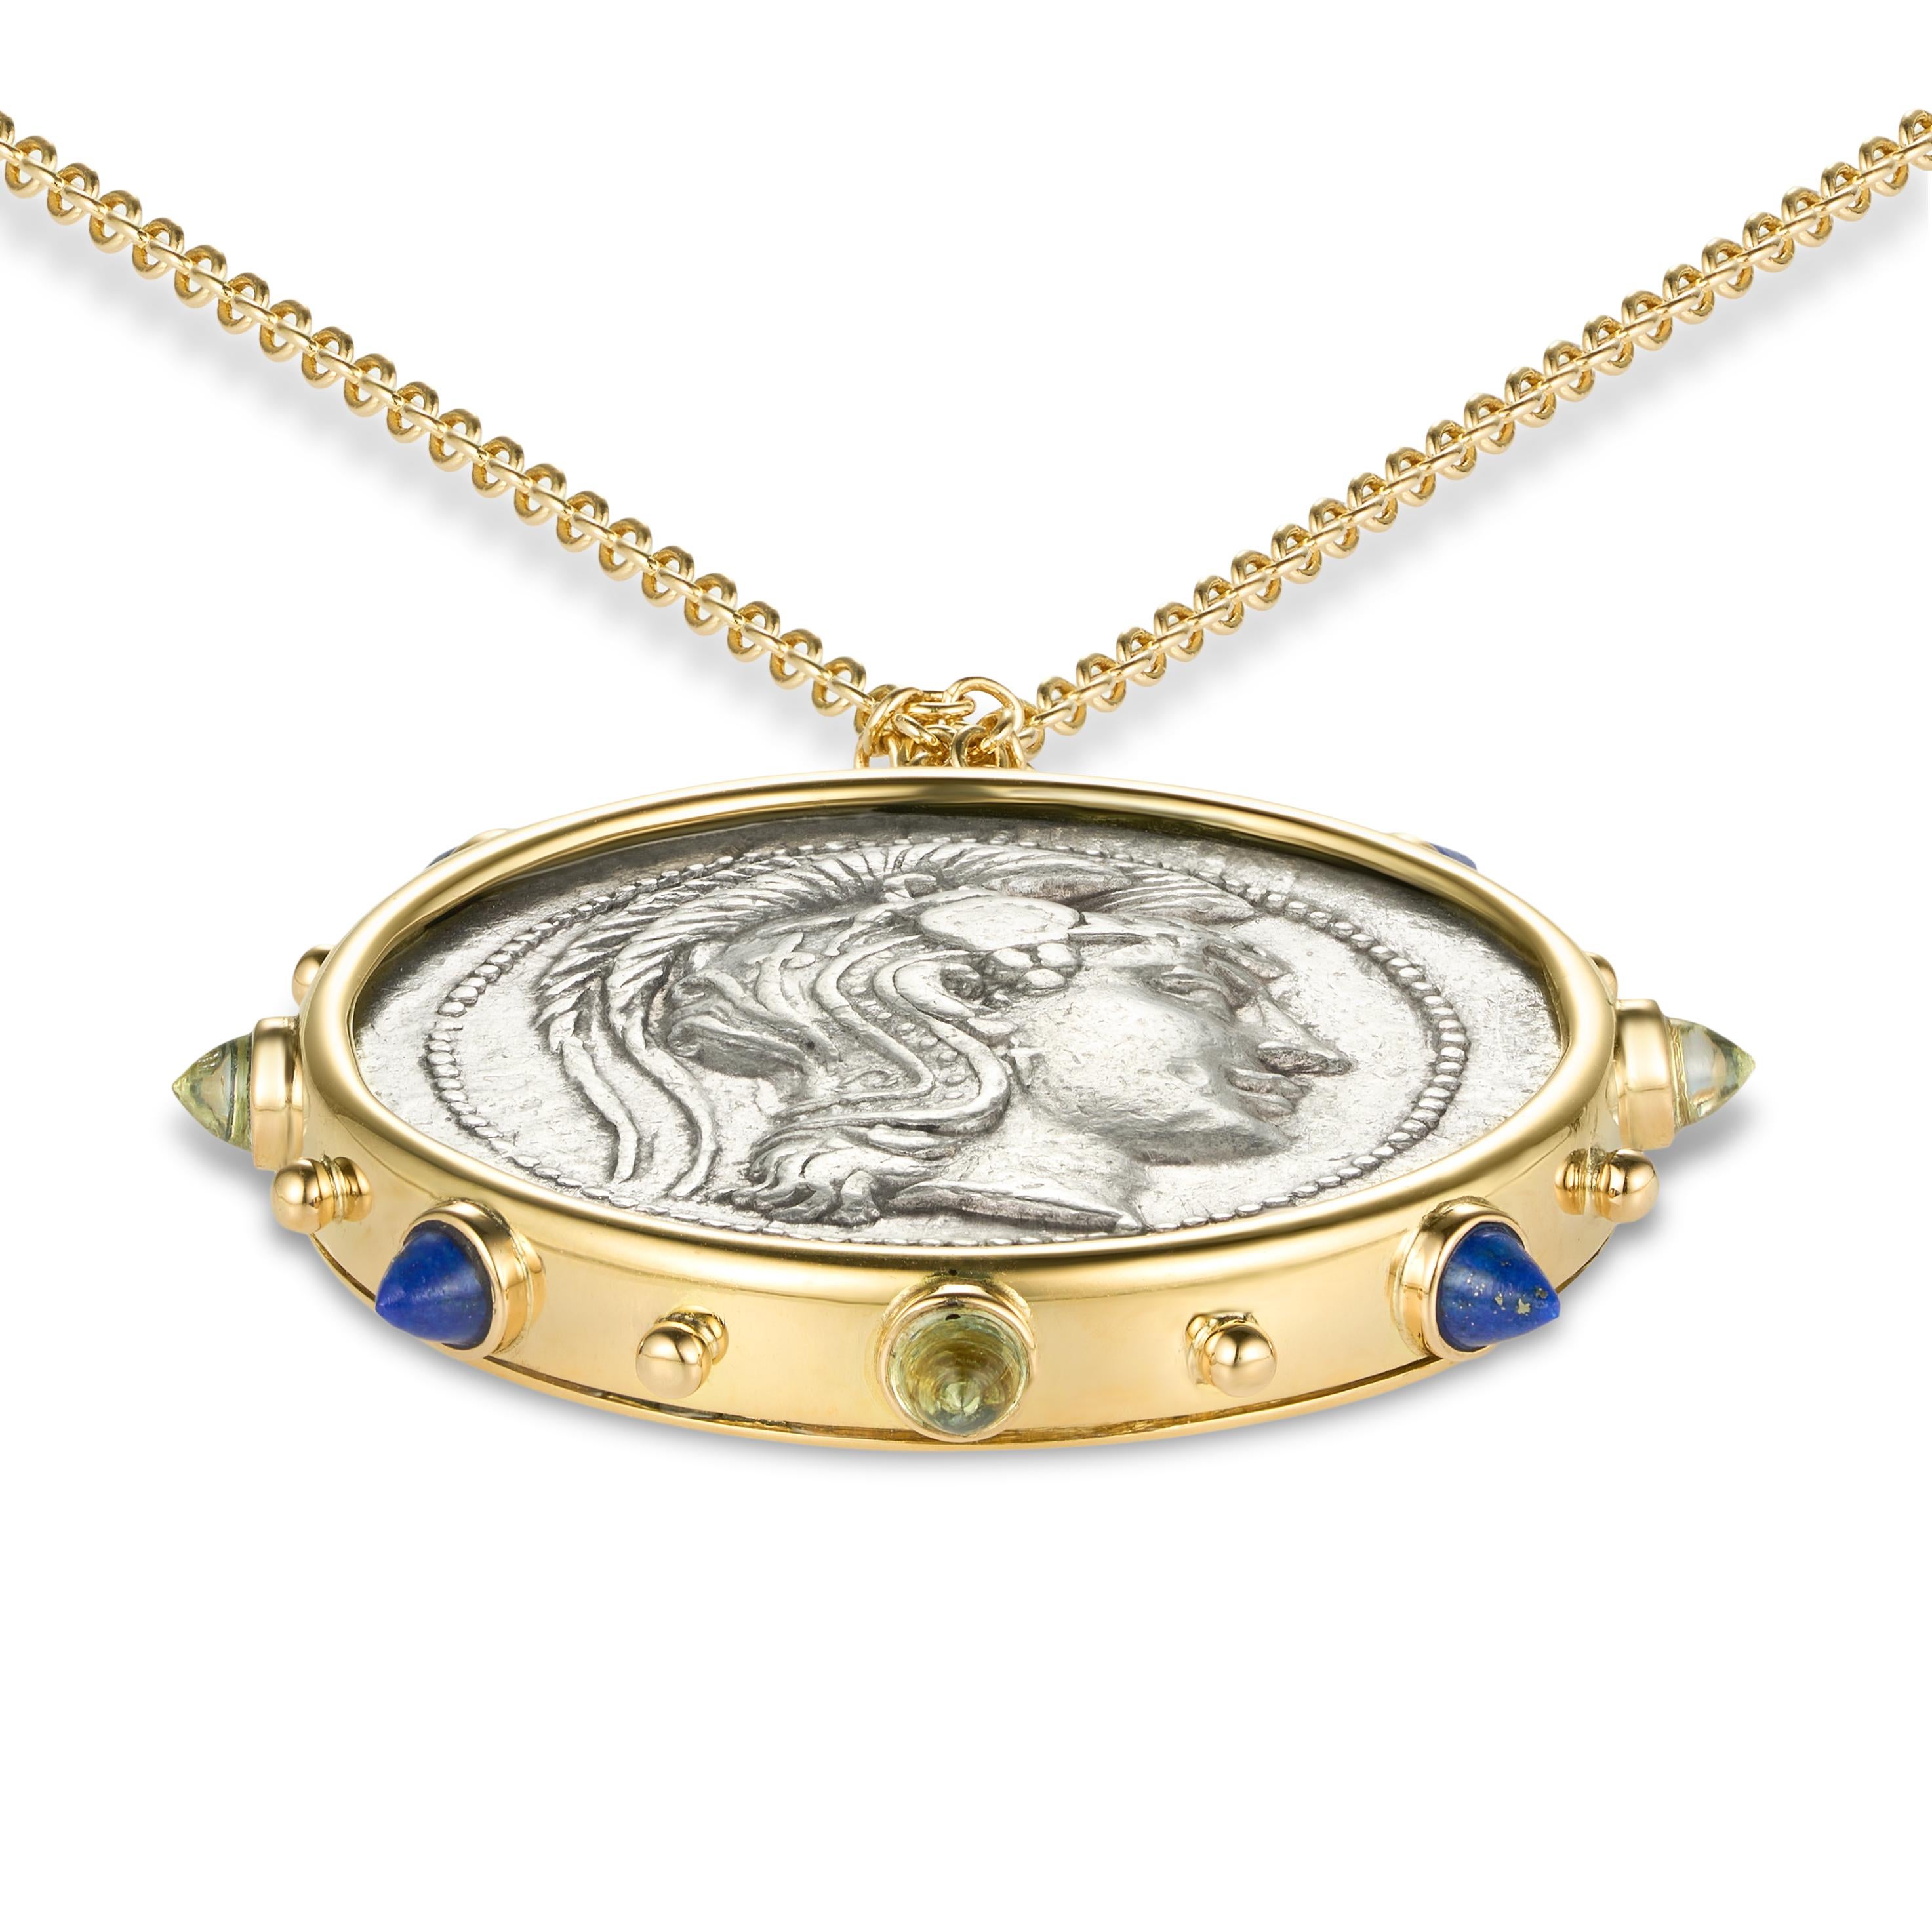 *RARE* This exquisite necklace showcases an authentic AR tetradrachm coin of Athena, dating back to circa 136/5 B.C., set in 18kt yellow gold. The coin is adorned with lapis and topaz cabochons.

COIN DETAILS:

- Origin: ATTICA, Athens.
- Period: